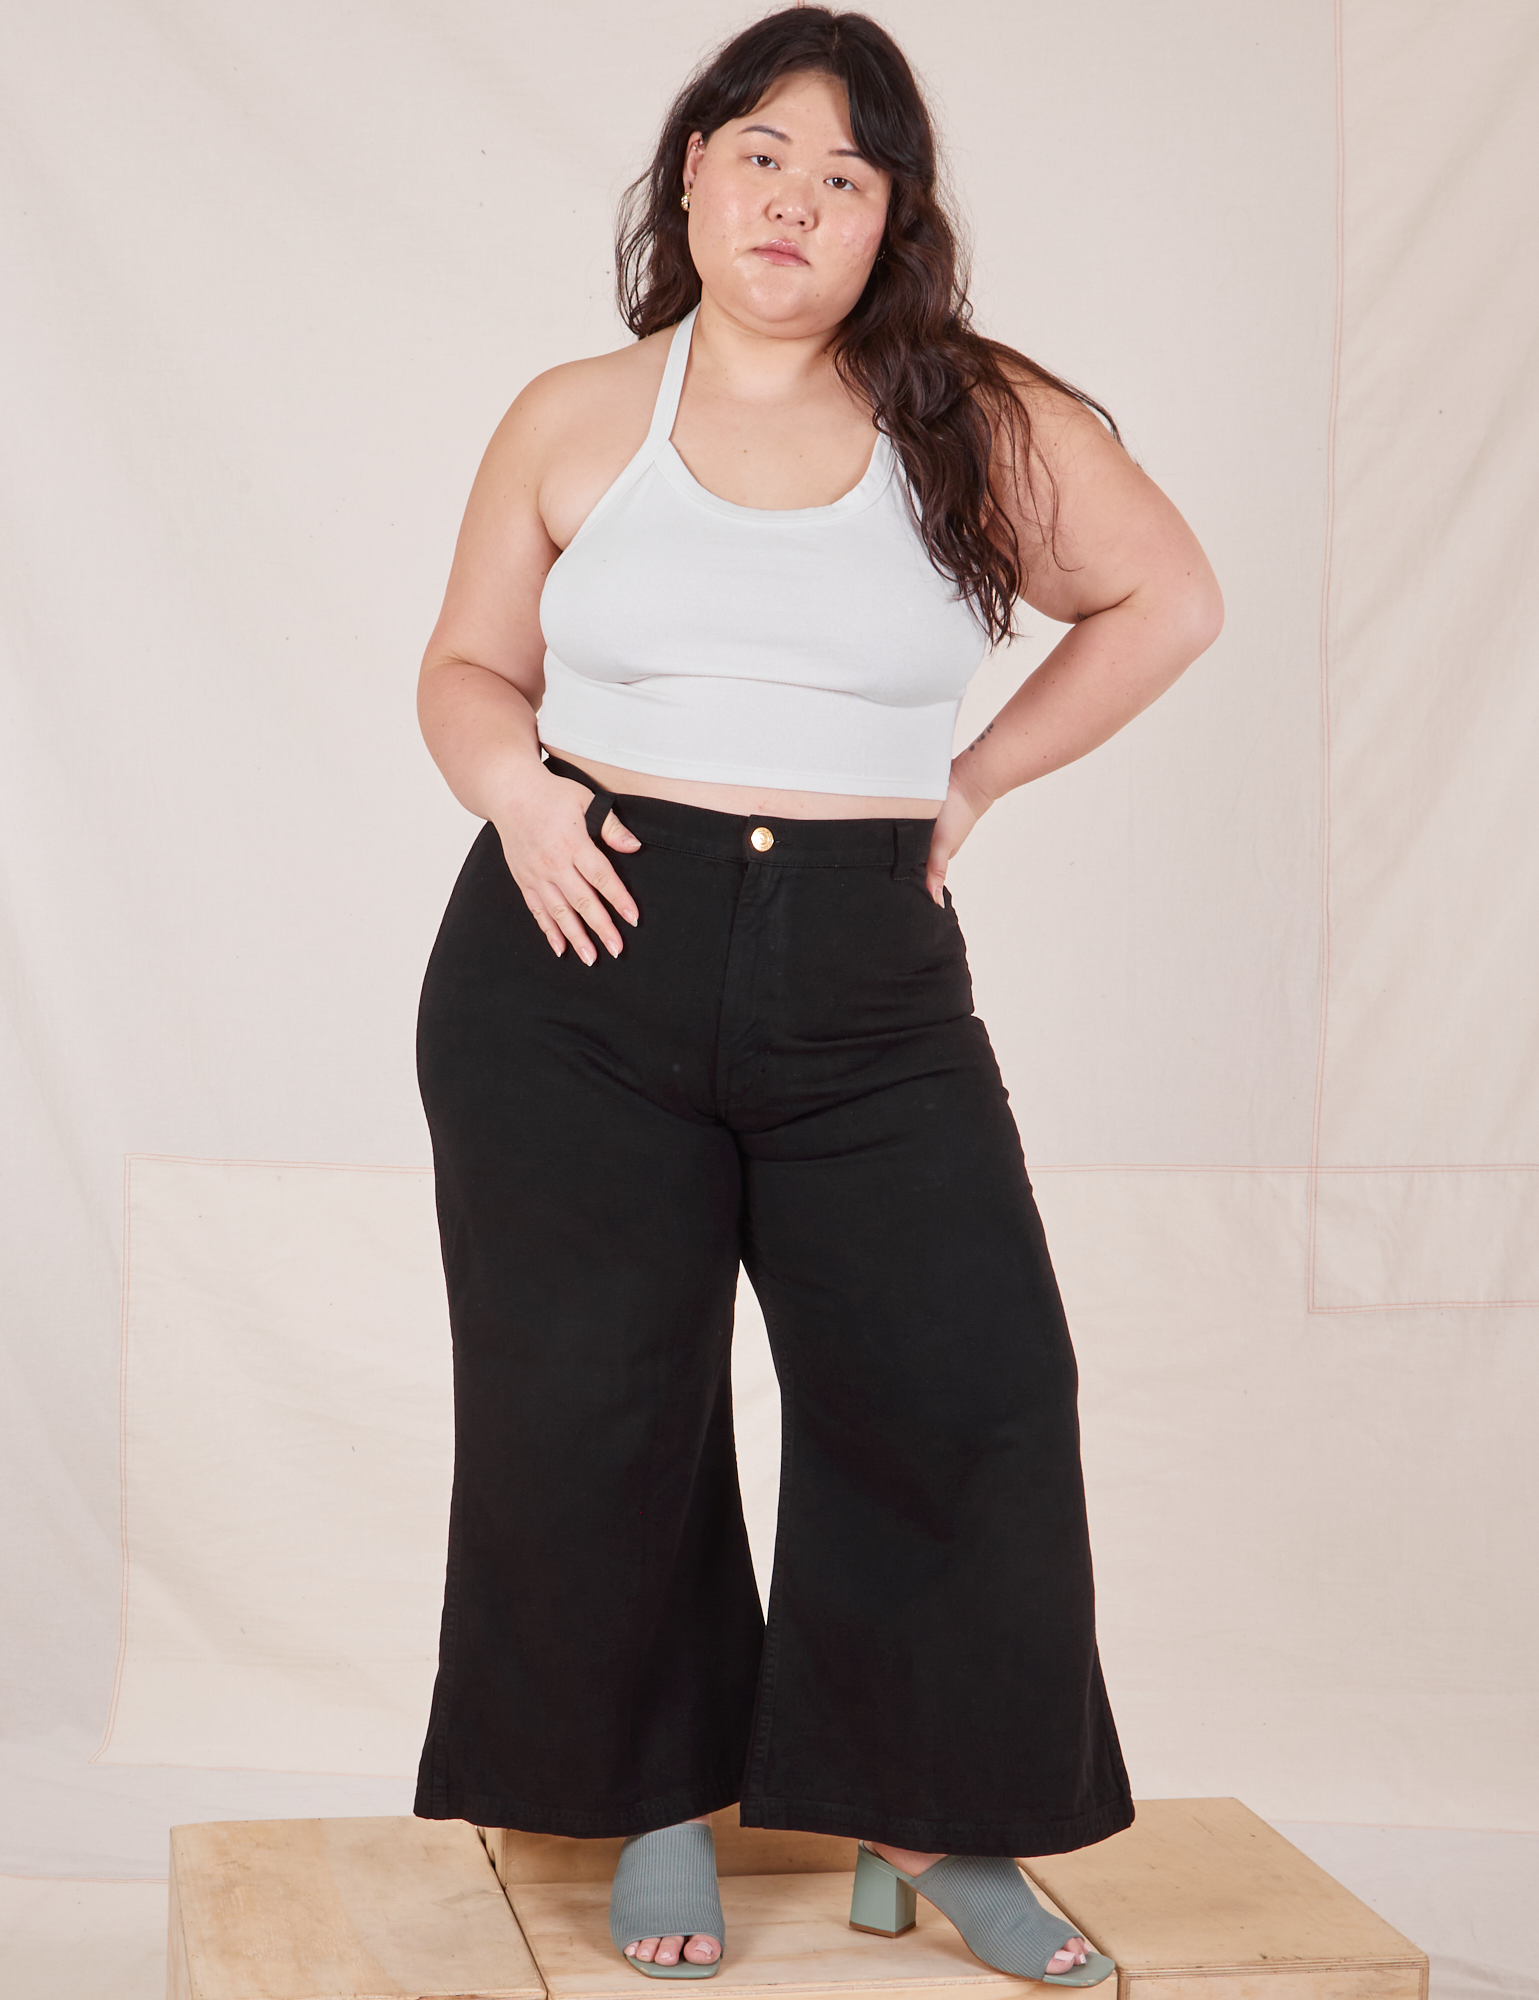 Ashley is 5&#39;7&quot; and wearing 1XL Petite Bell Bottoms in Basic Black paired with vintage off-white Halter Top